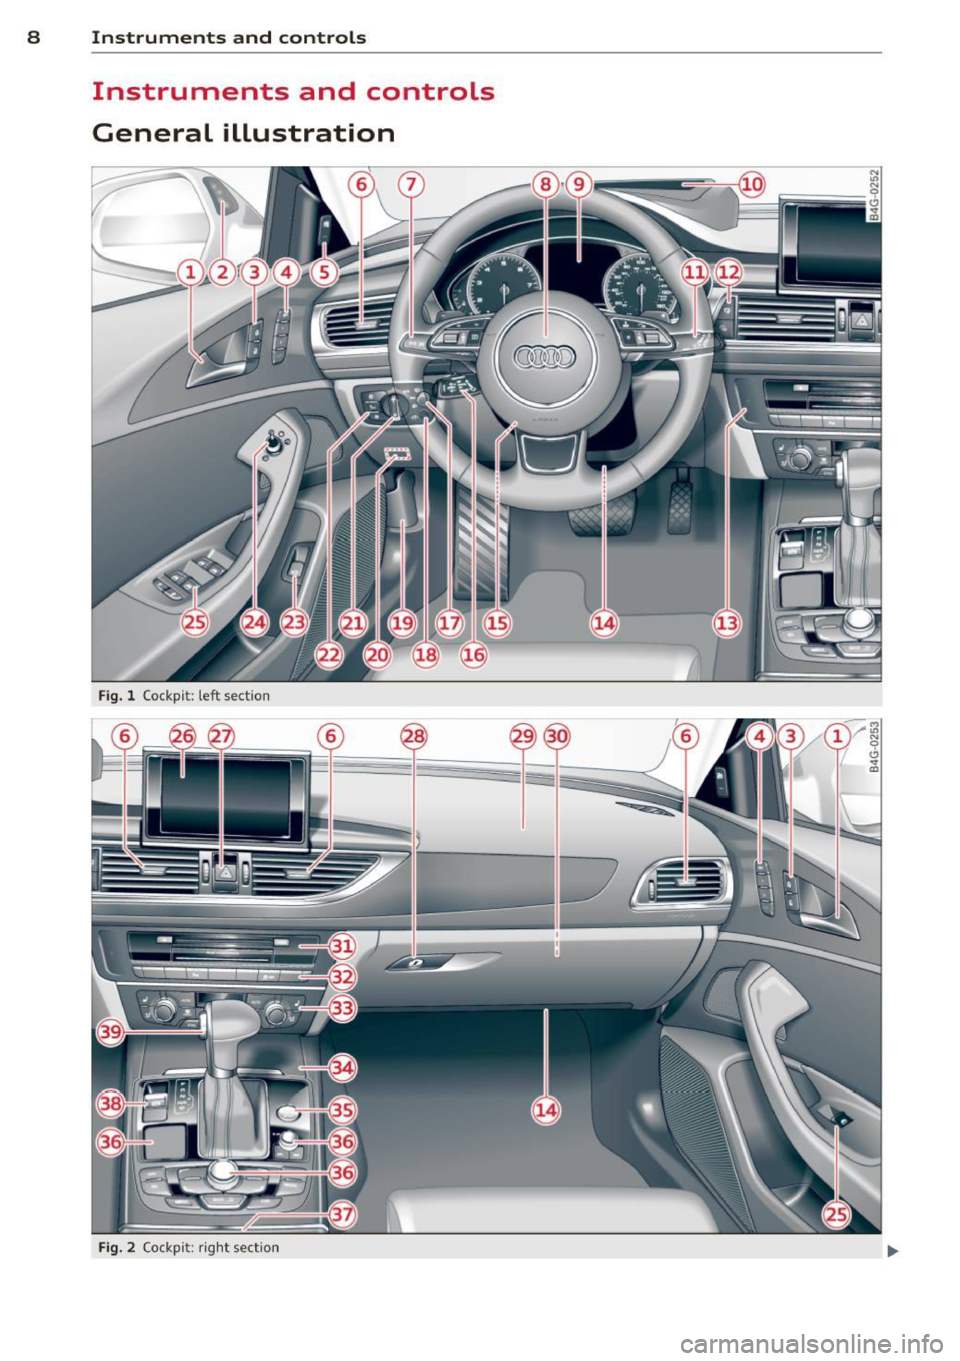 AUDI A6 2014  Owners Manual 8  Instruments and controls 
Instruments  and  controls 
General  illustration 
Fig. l Cockp it:  left  sect io n 
Fig. 2 Co ck pi t: ri ght  sect io n  